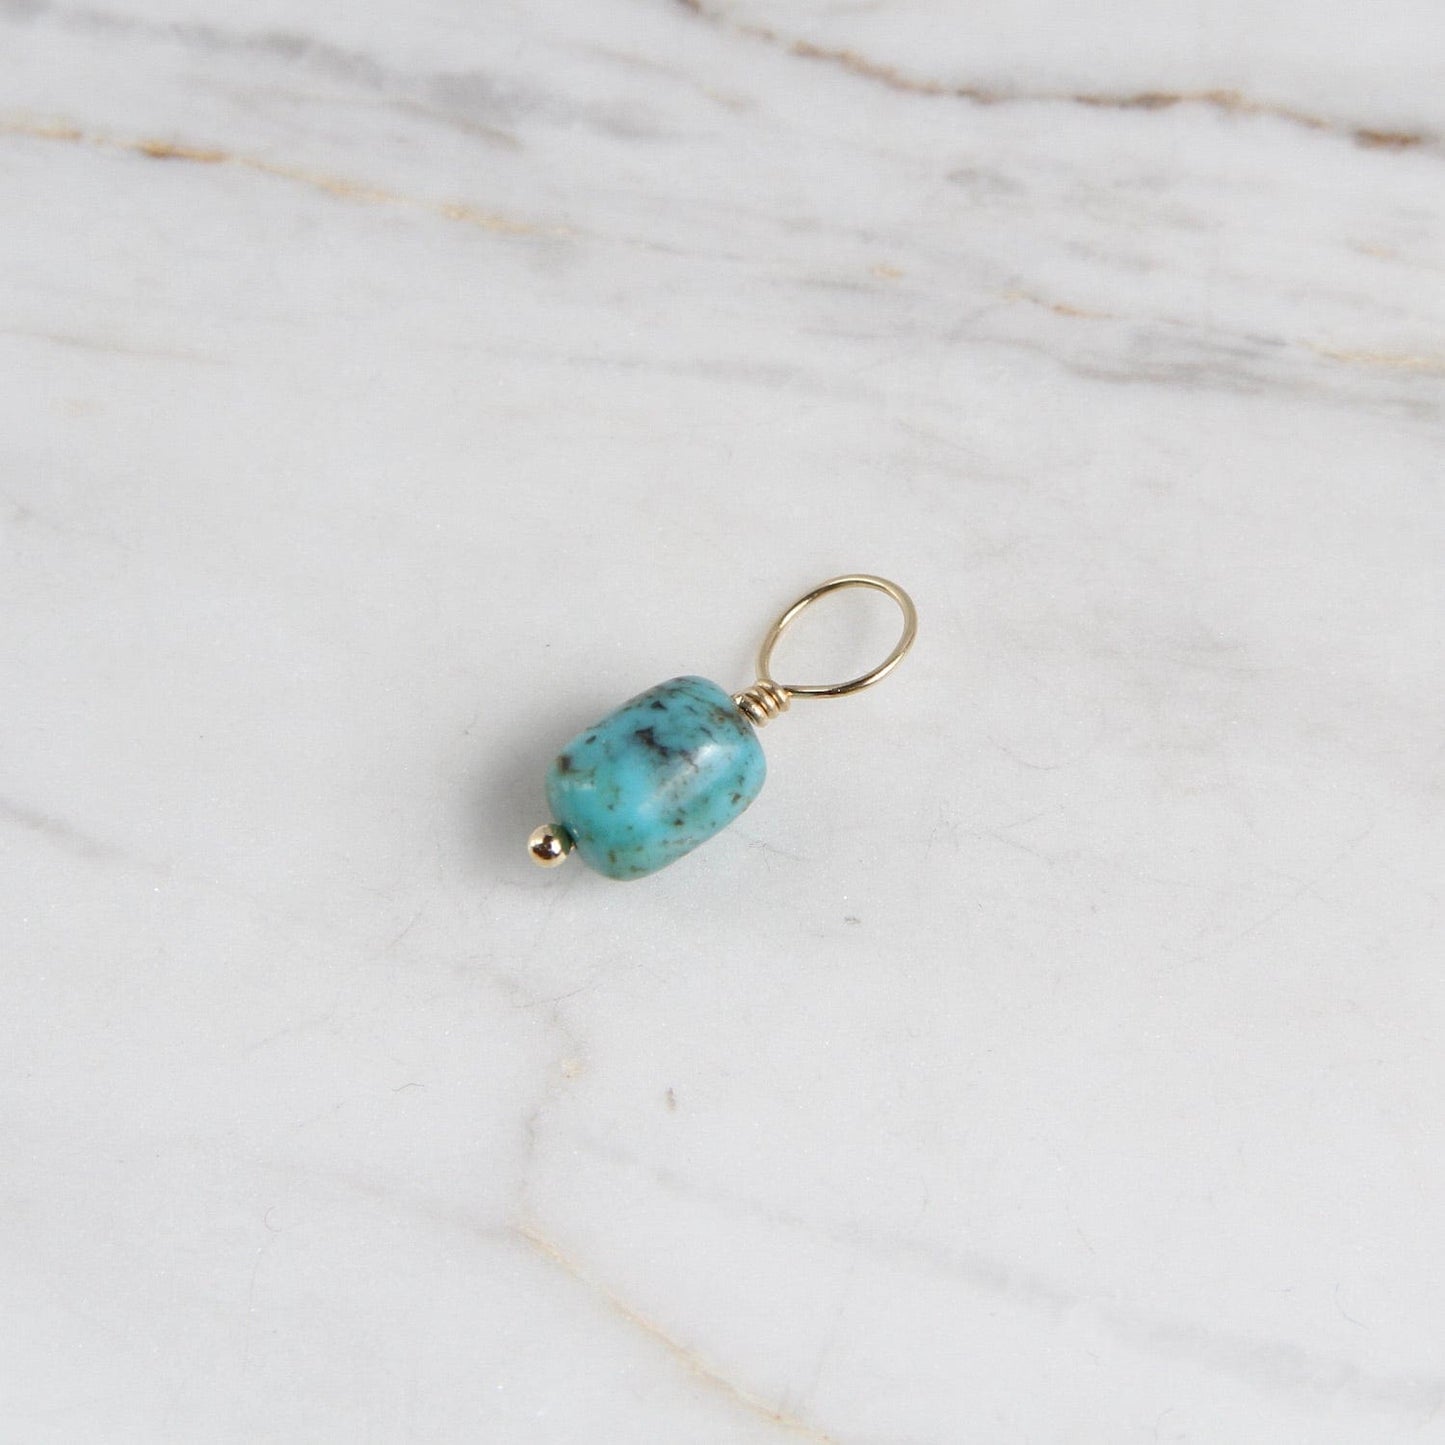 866 CHM Vein Turquoise  - Unfaceted Cylindar Gemstone Charm